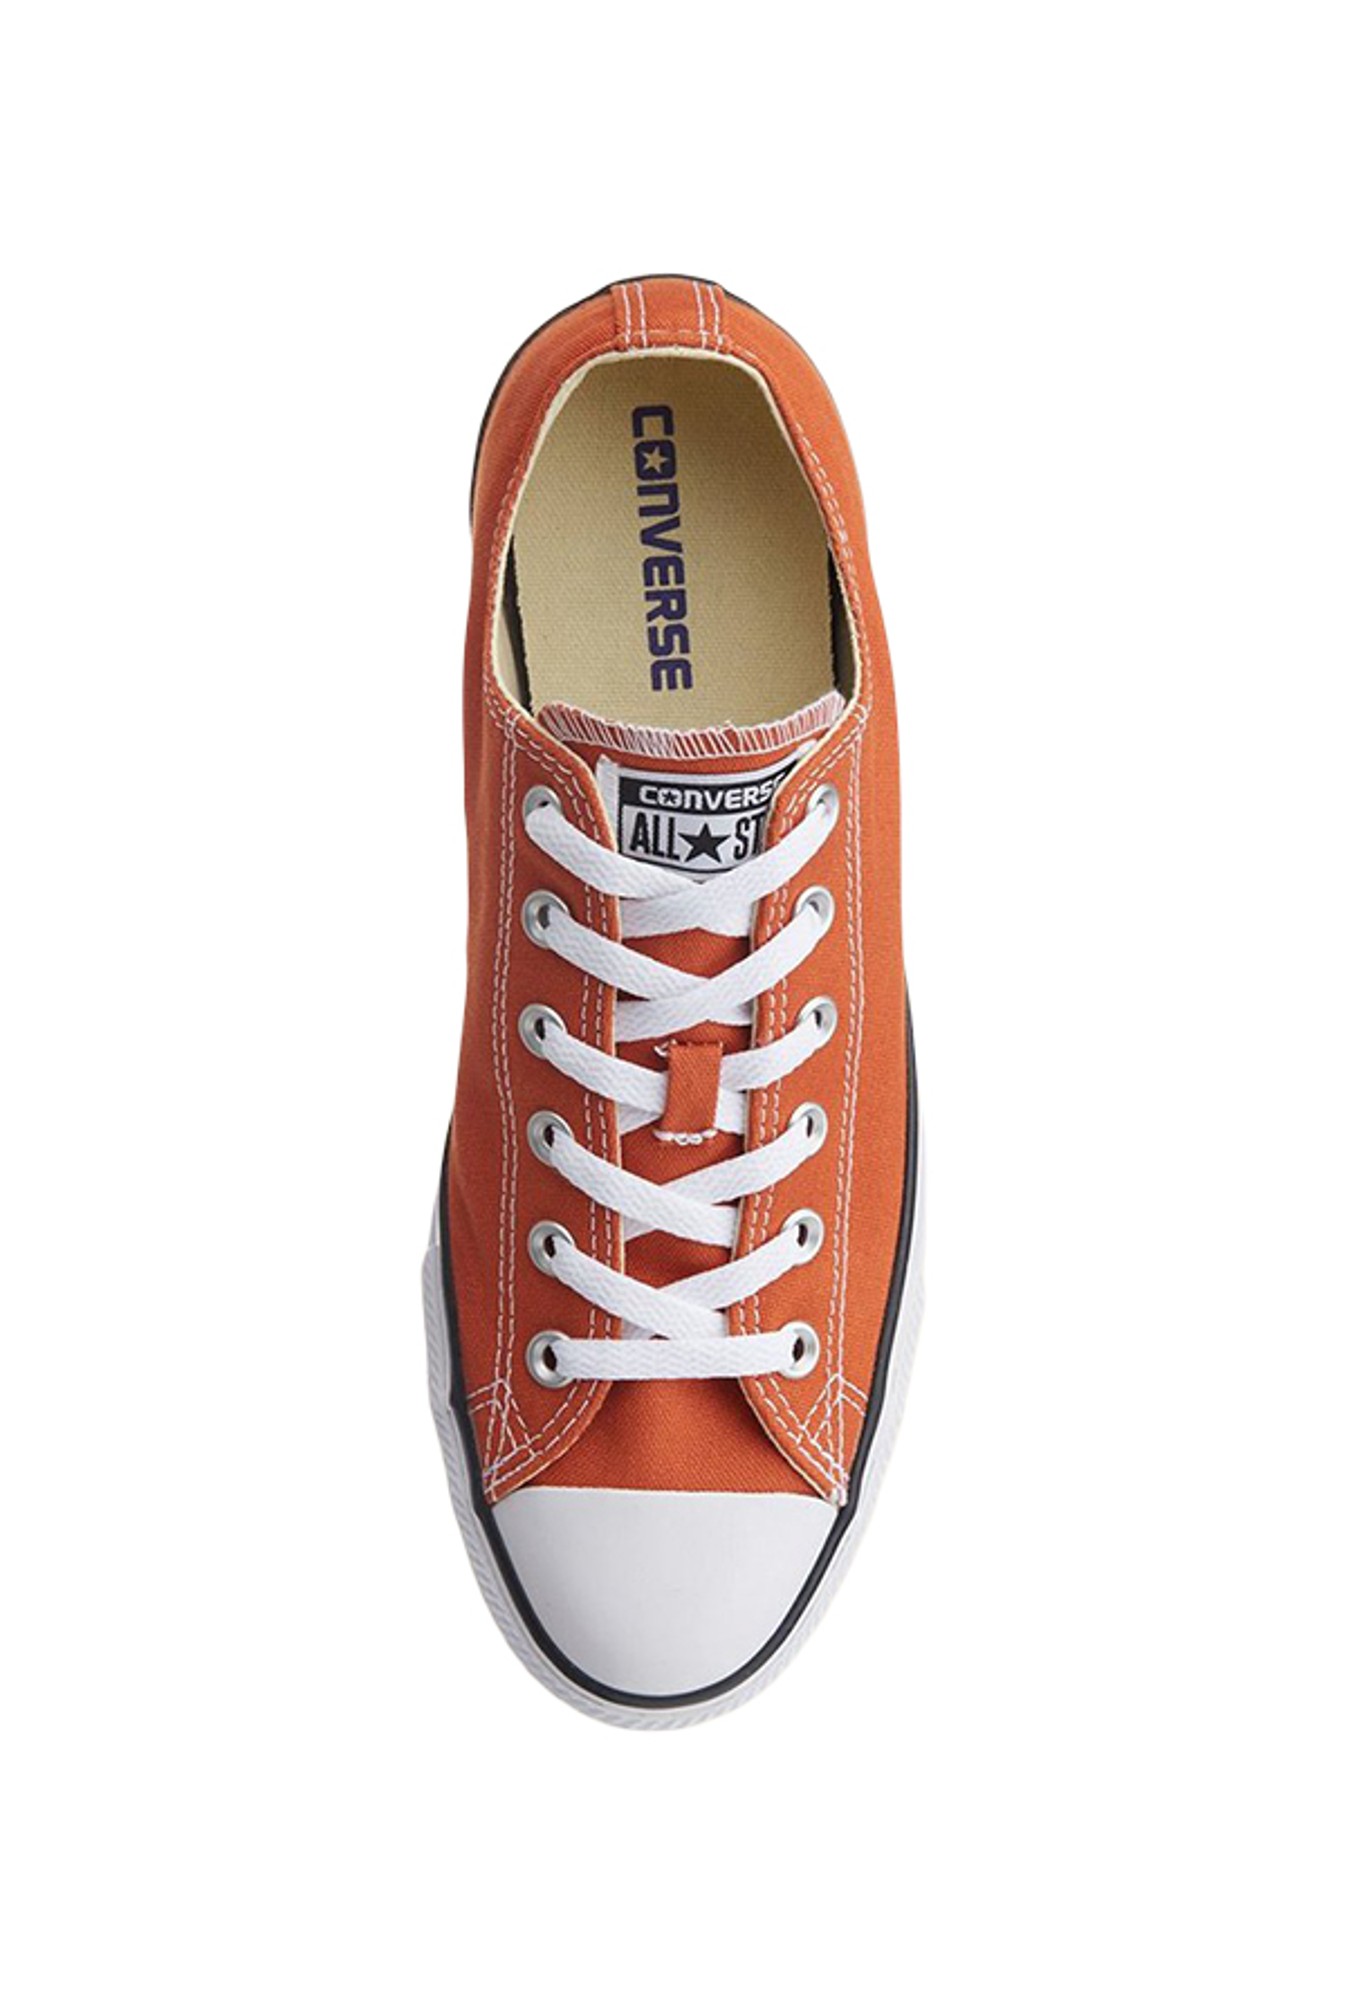 buy converse shoes online india